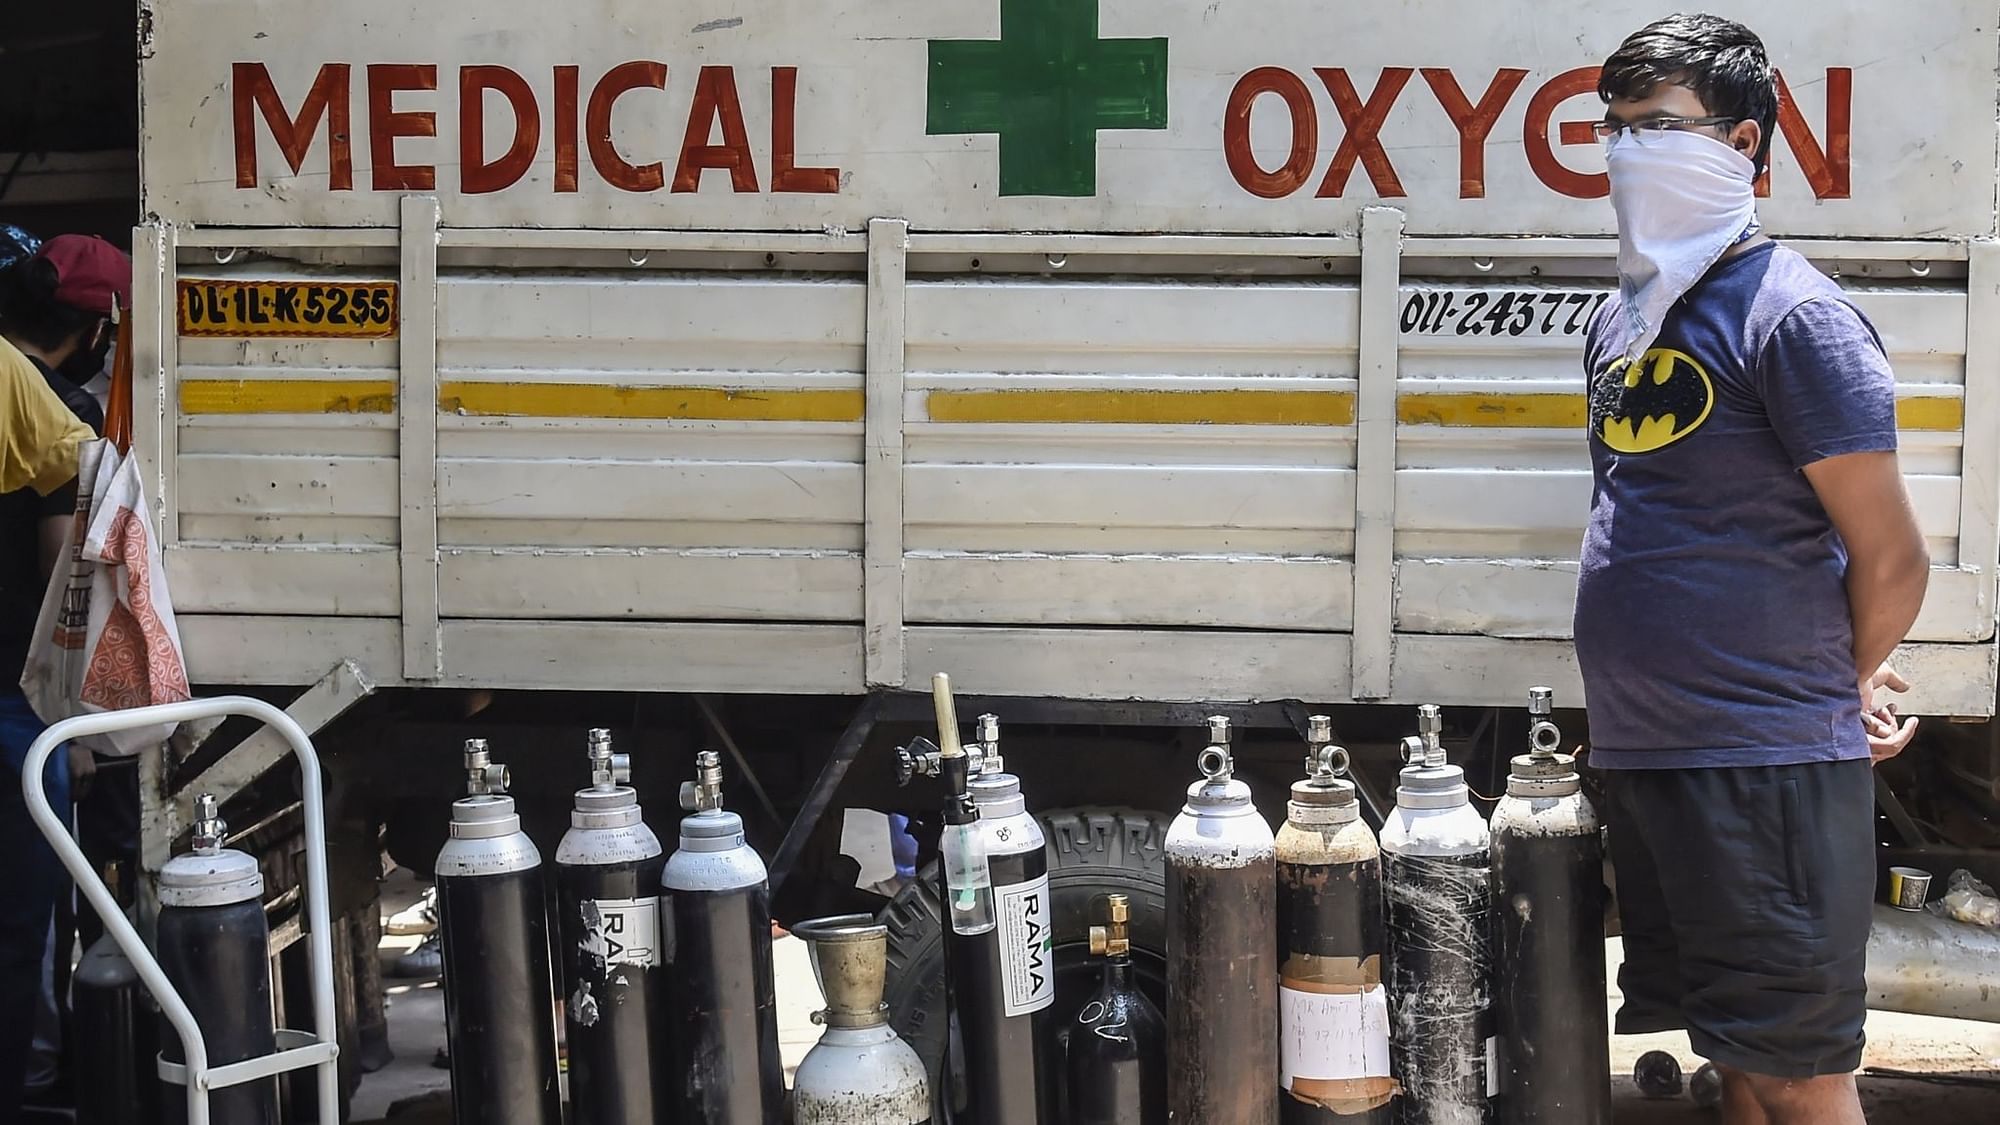 New Delhi: A family member of a COVID-19 patient outside an oxygen-filling centre to refill their empty cylinders. Image used for representation.